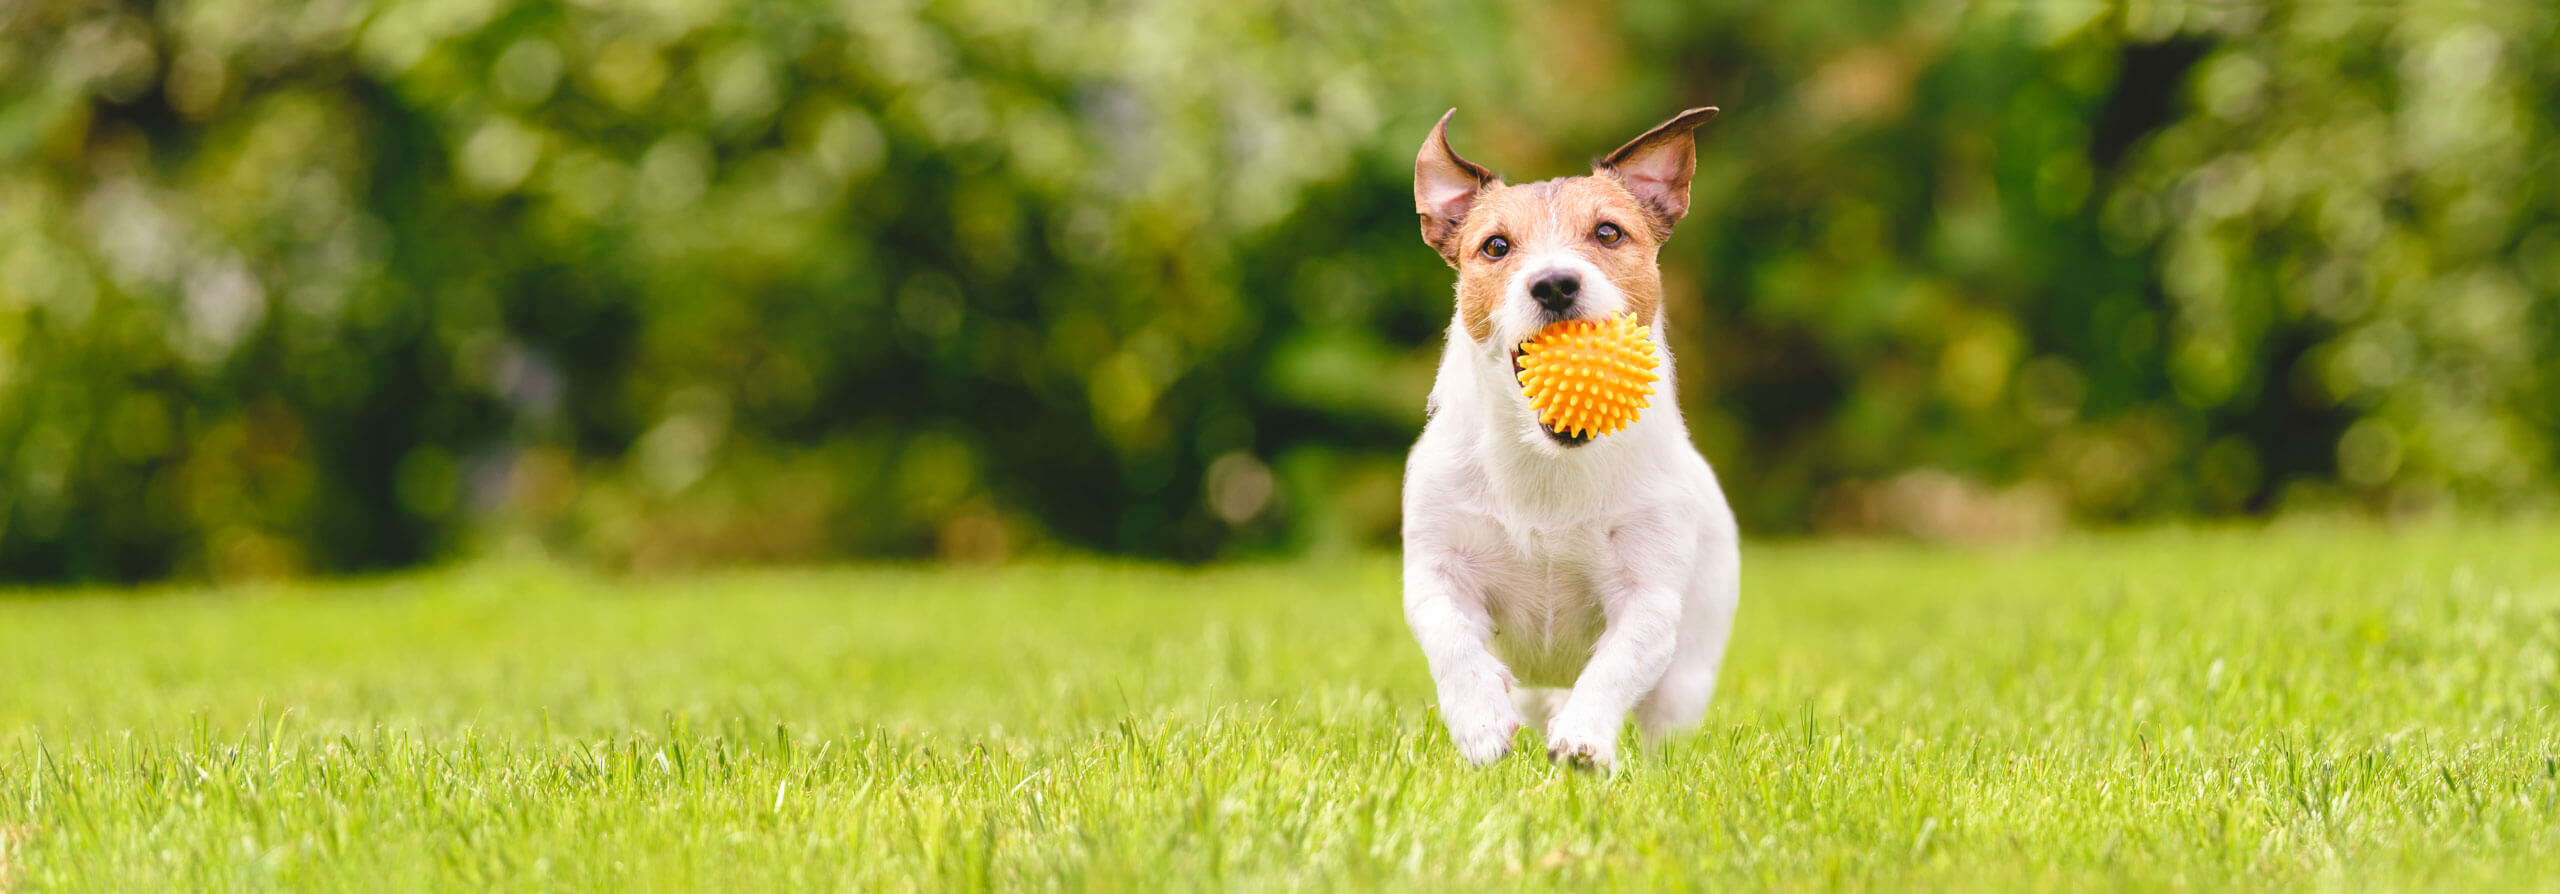 Dog running in grass with ball in mouth